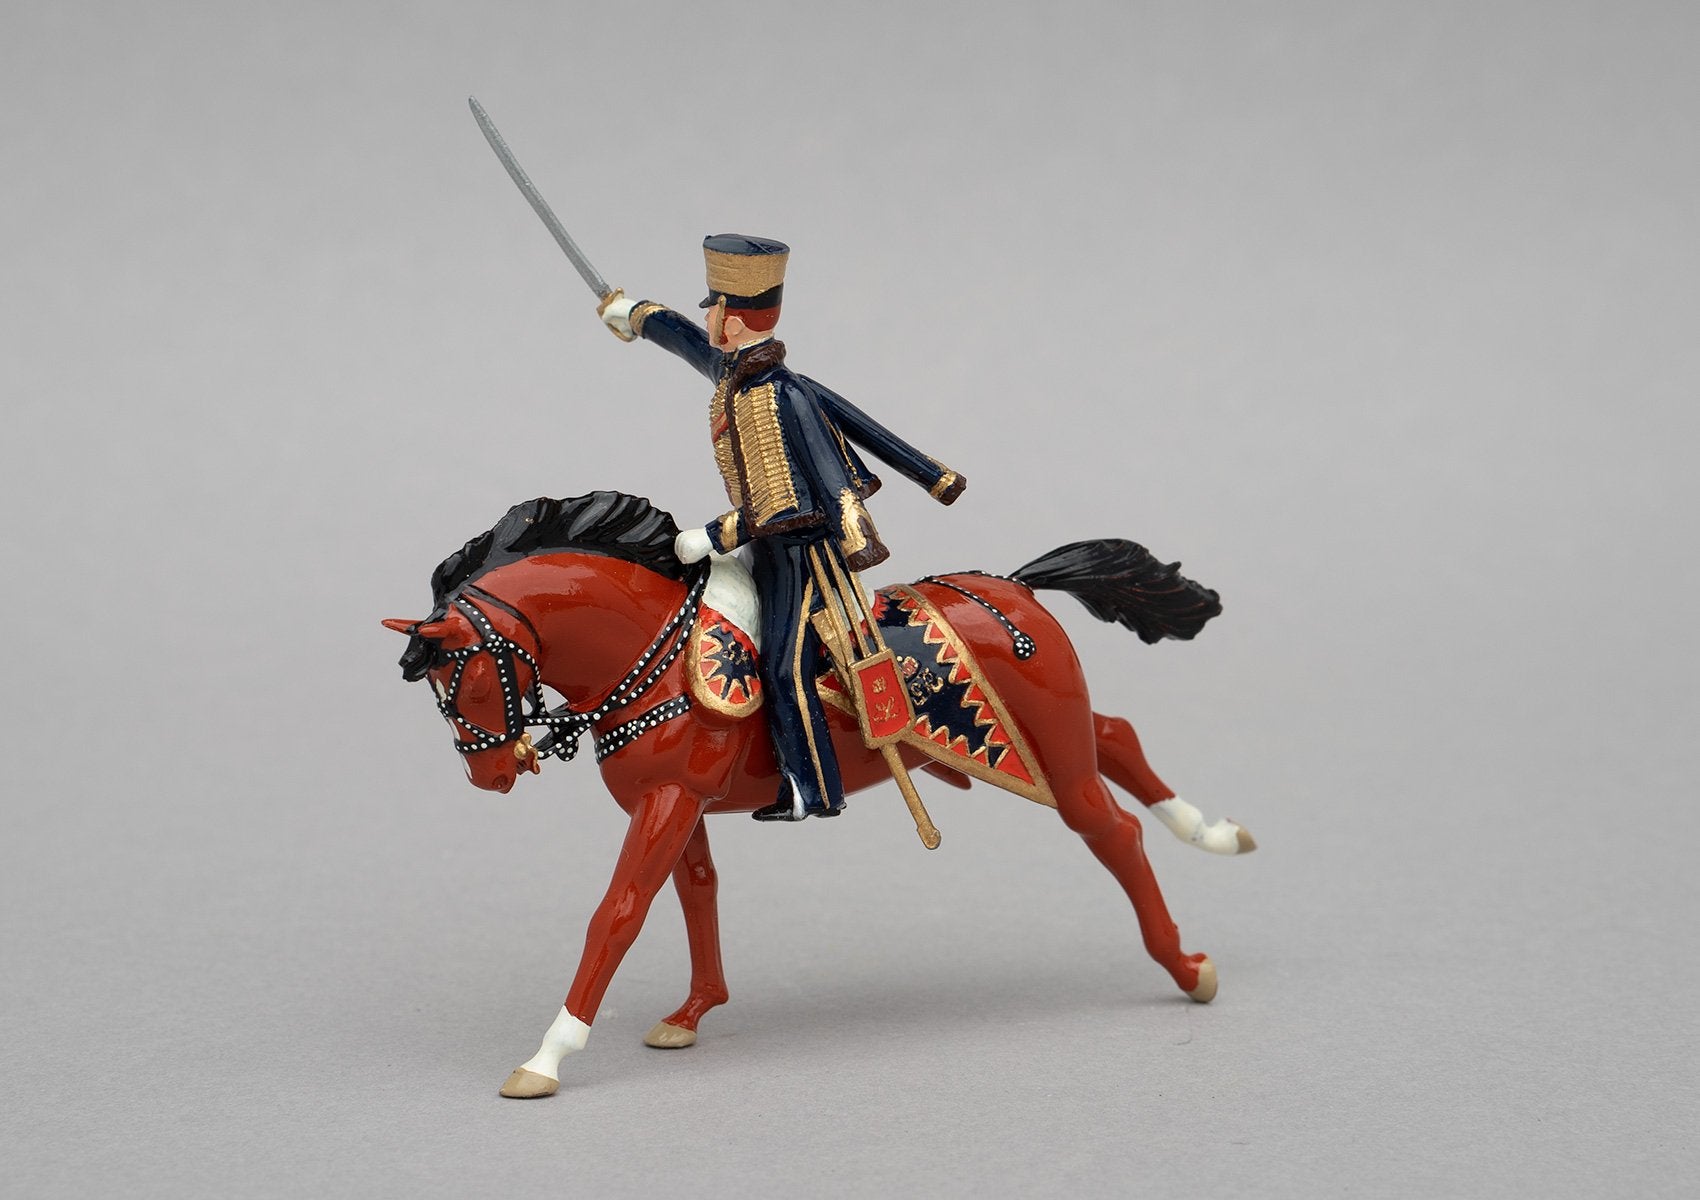 Set 114 Earl of Uxbridge, Waterloo, 1815 | British Cavalry | Napoleonic Wars | British commander of cavalry and artillery Napoleonic Wars, Waterloo.  Dressed in the uniform of the 7th Hussars. Single mounted officer with sabre on bay horse | Waterloo | © Imperial Productions | Sculpt by David Cowe